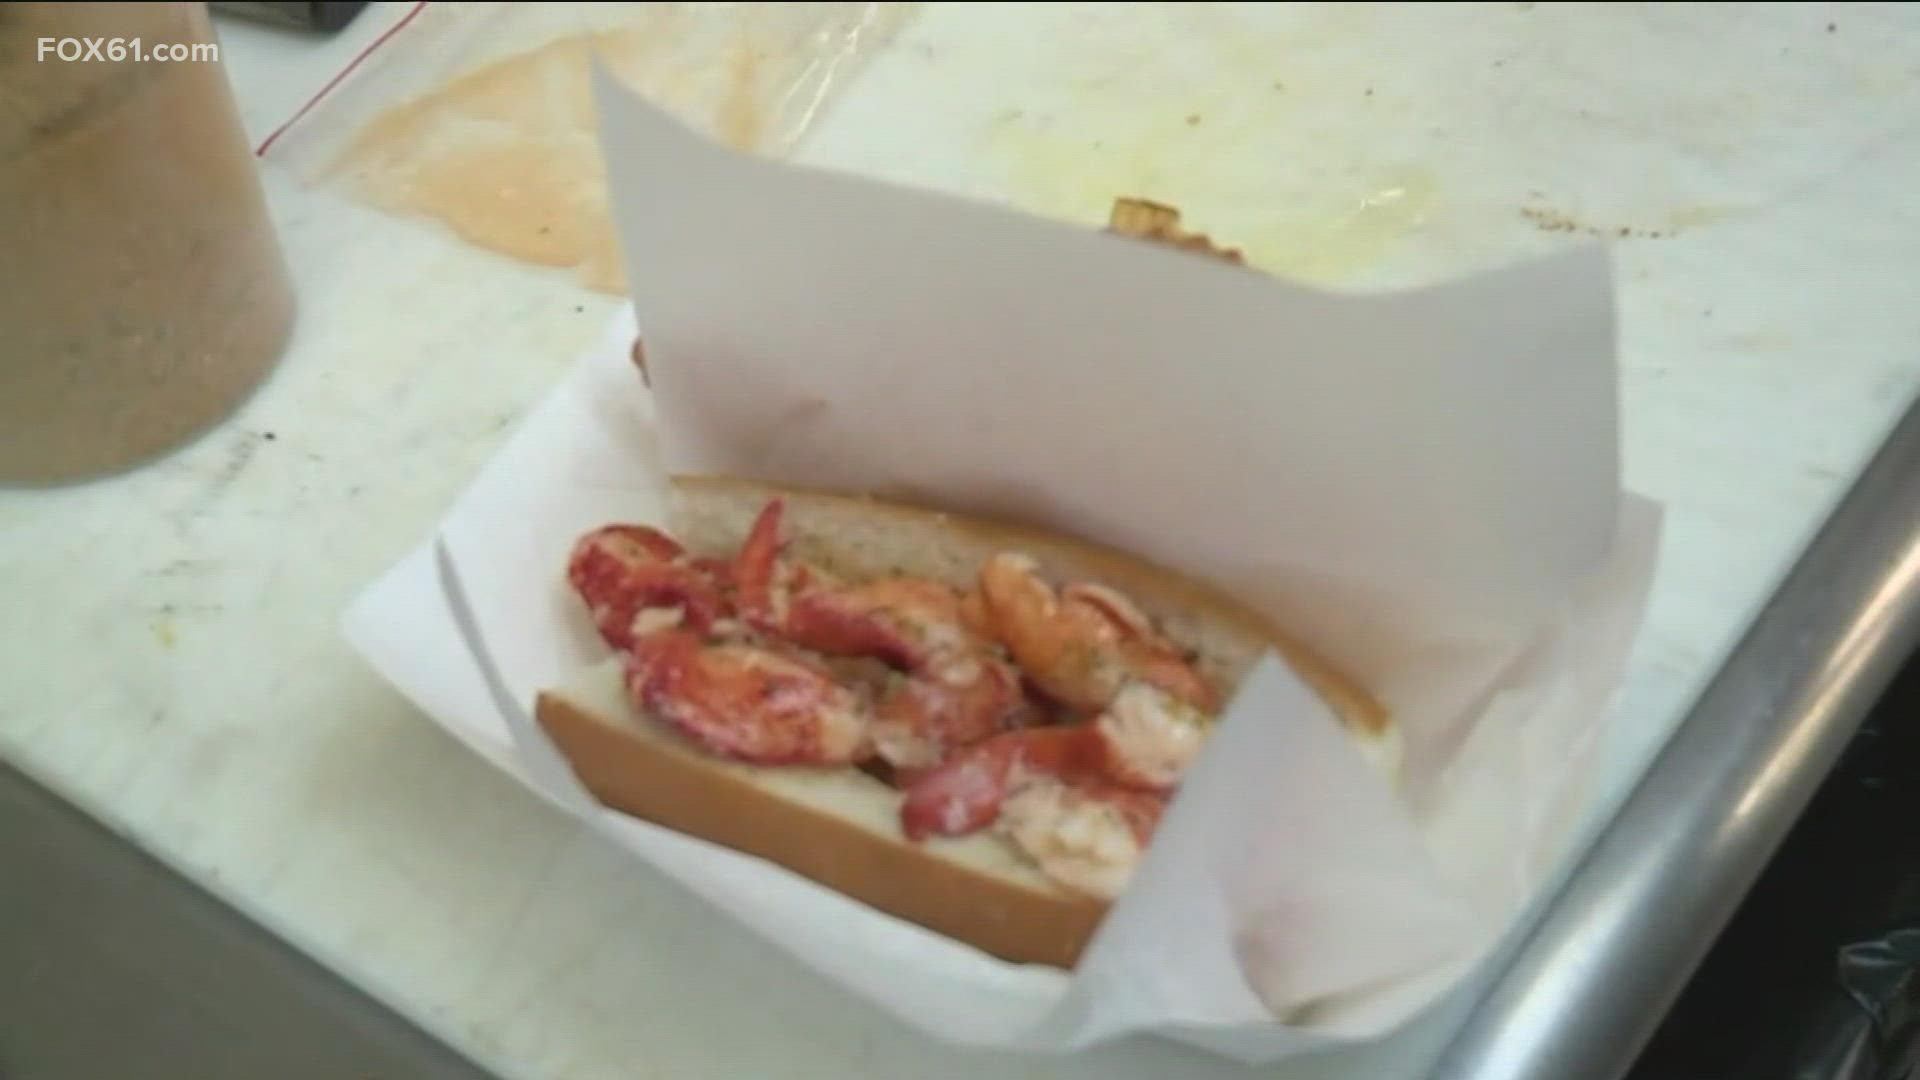 Meal House: The LobsterCraft food truck stopped by FOX61 to prepare lobster rolls and lobster bisque.